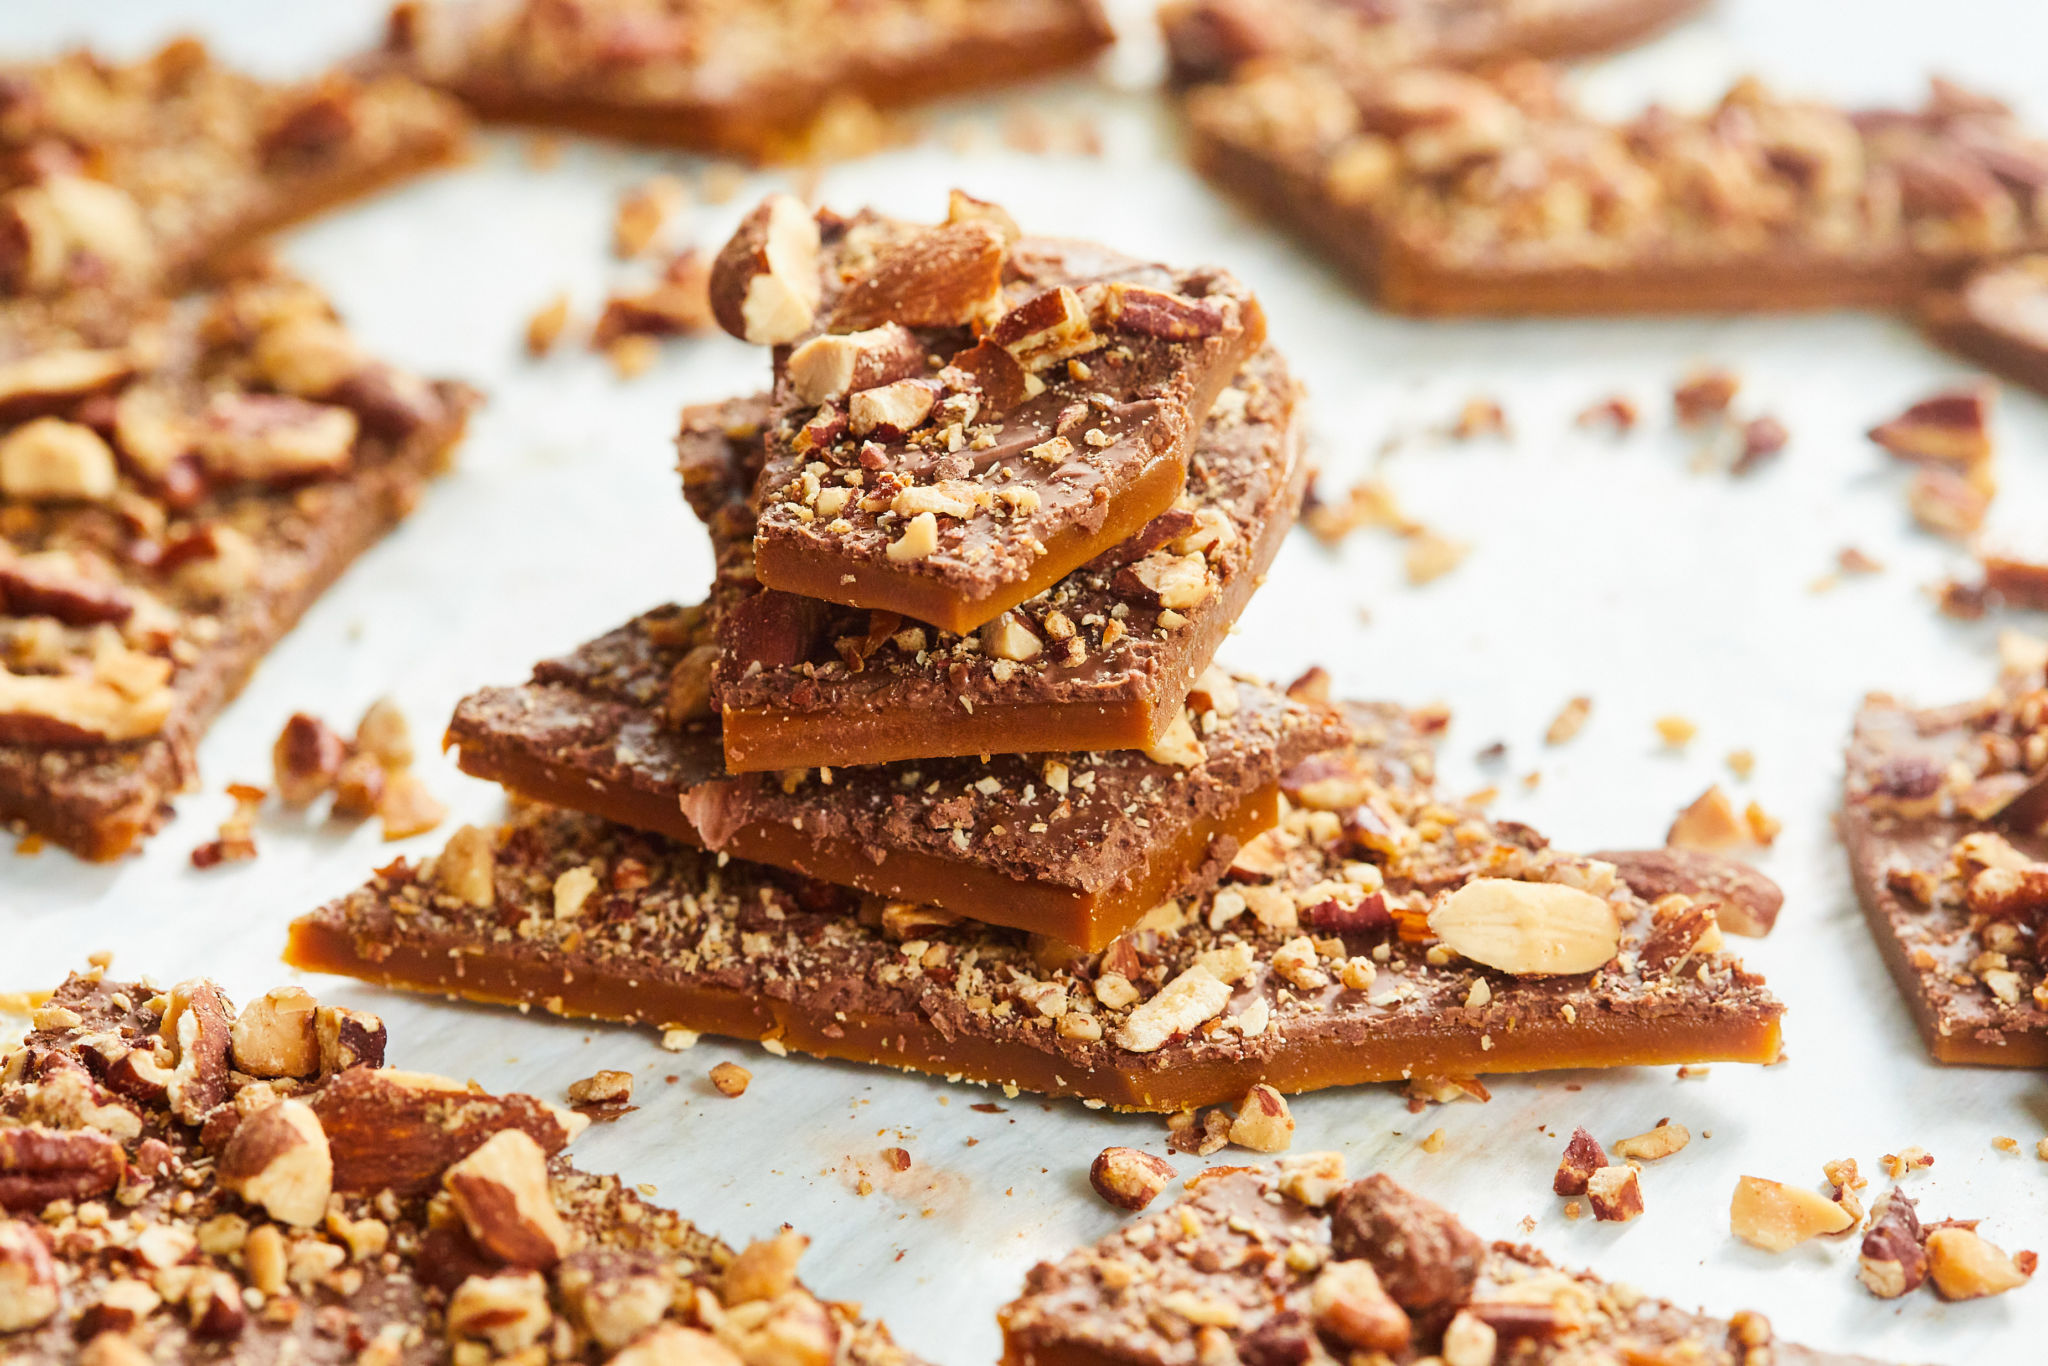 A stack of English Toffee broken into delicious shards.